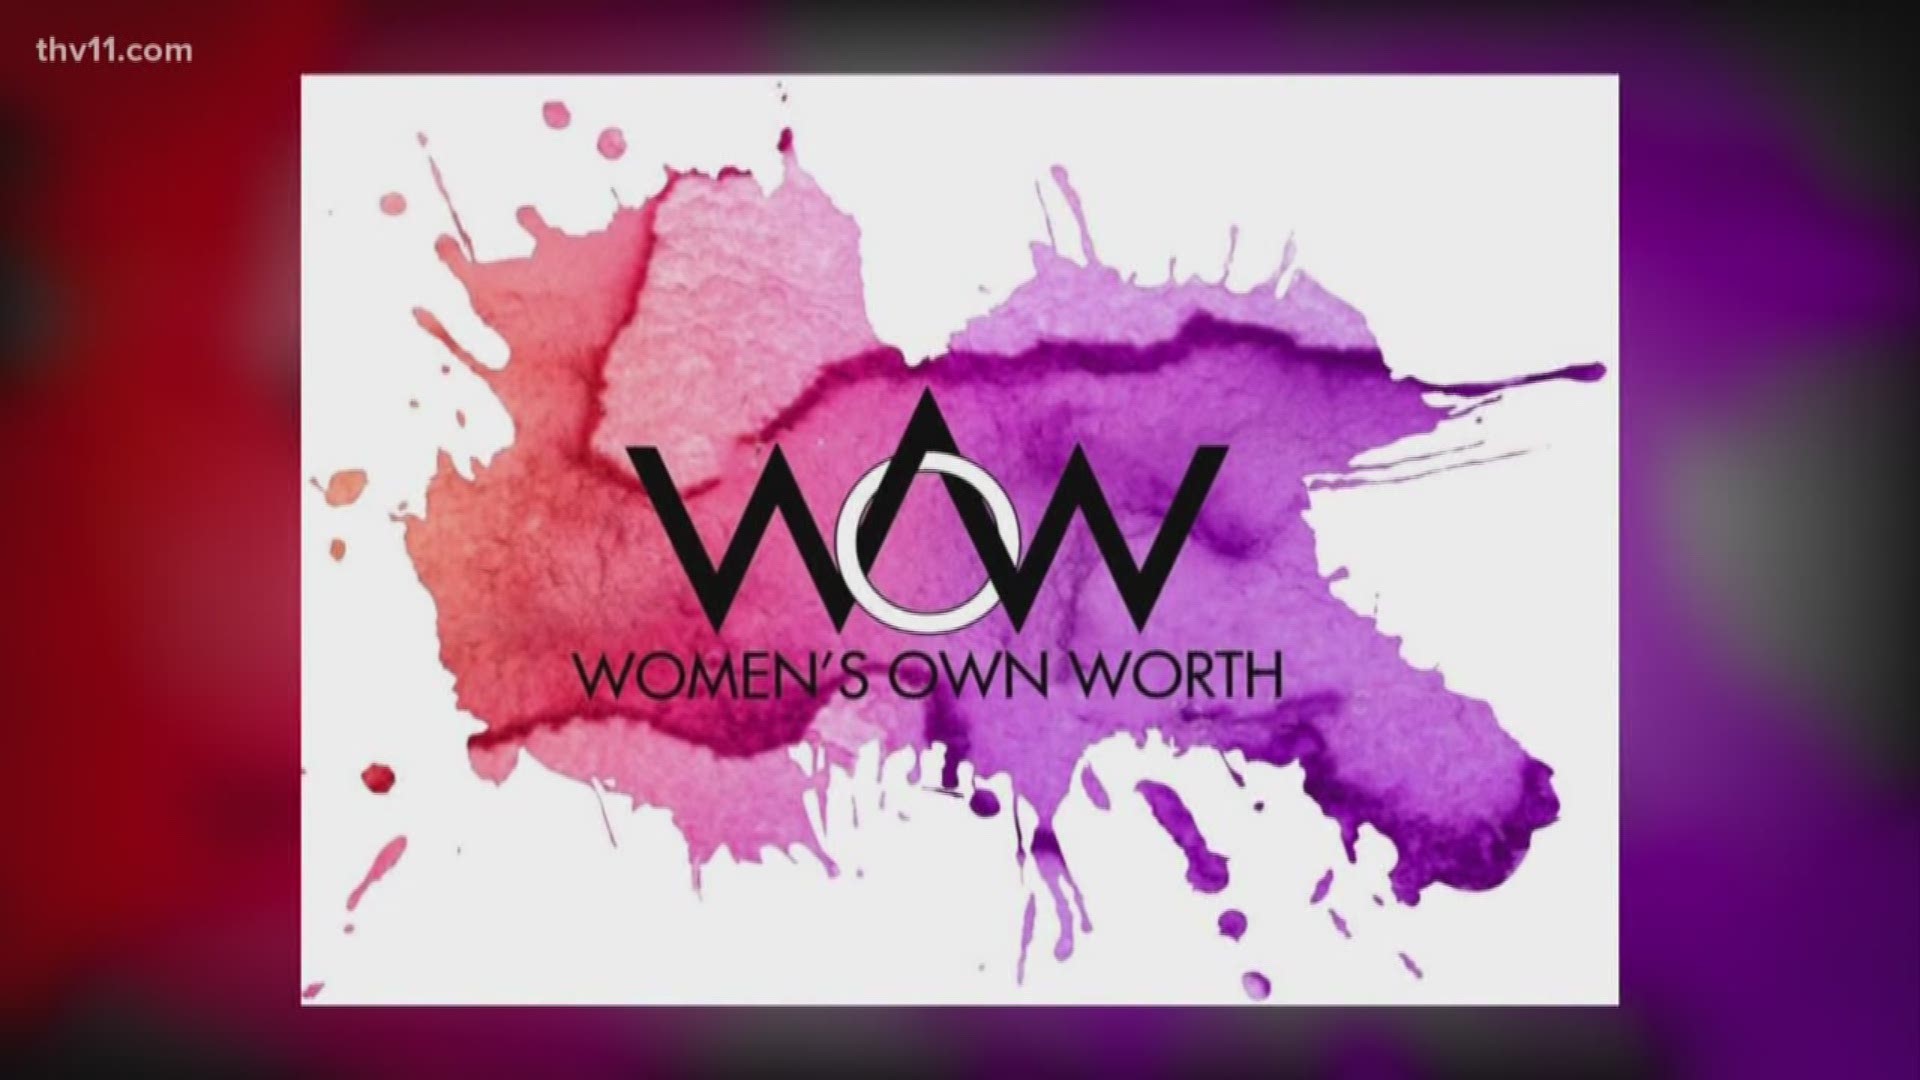 Women's Own Worth is a grassroots organization working to empower survivors of crime and domestic violence and they're asking for help from the community.